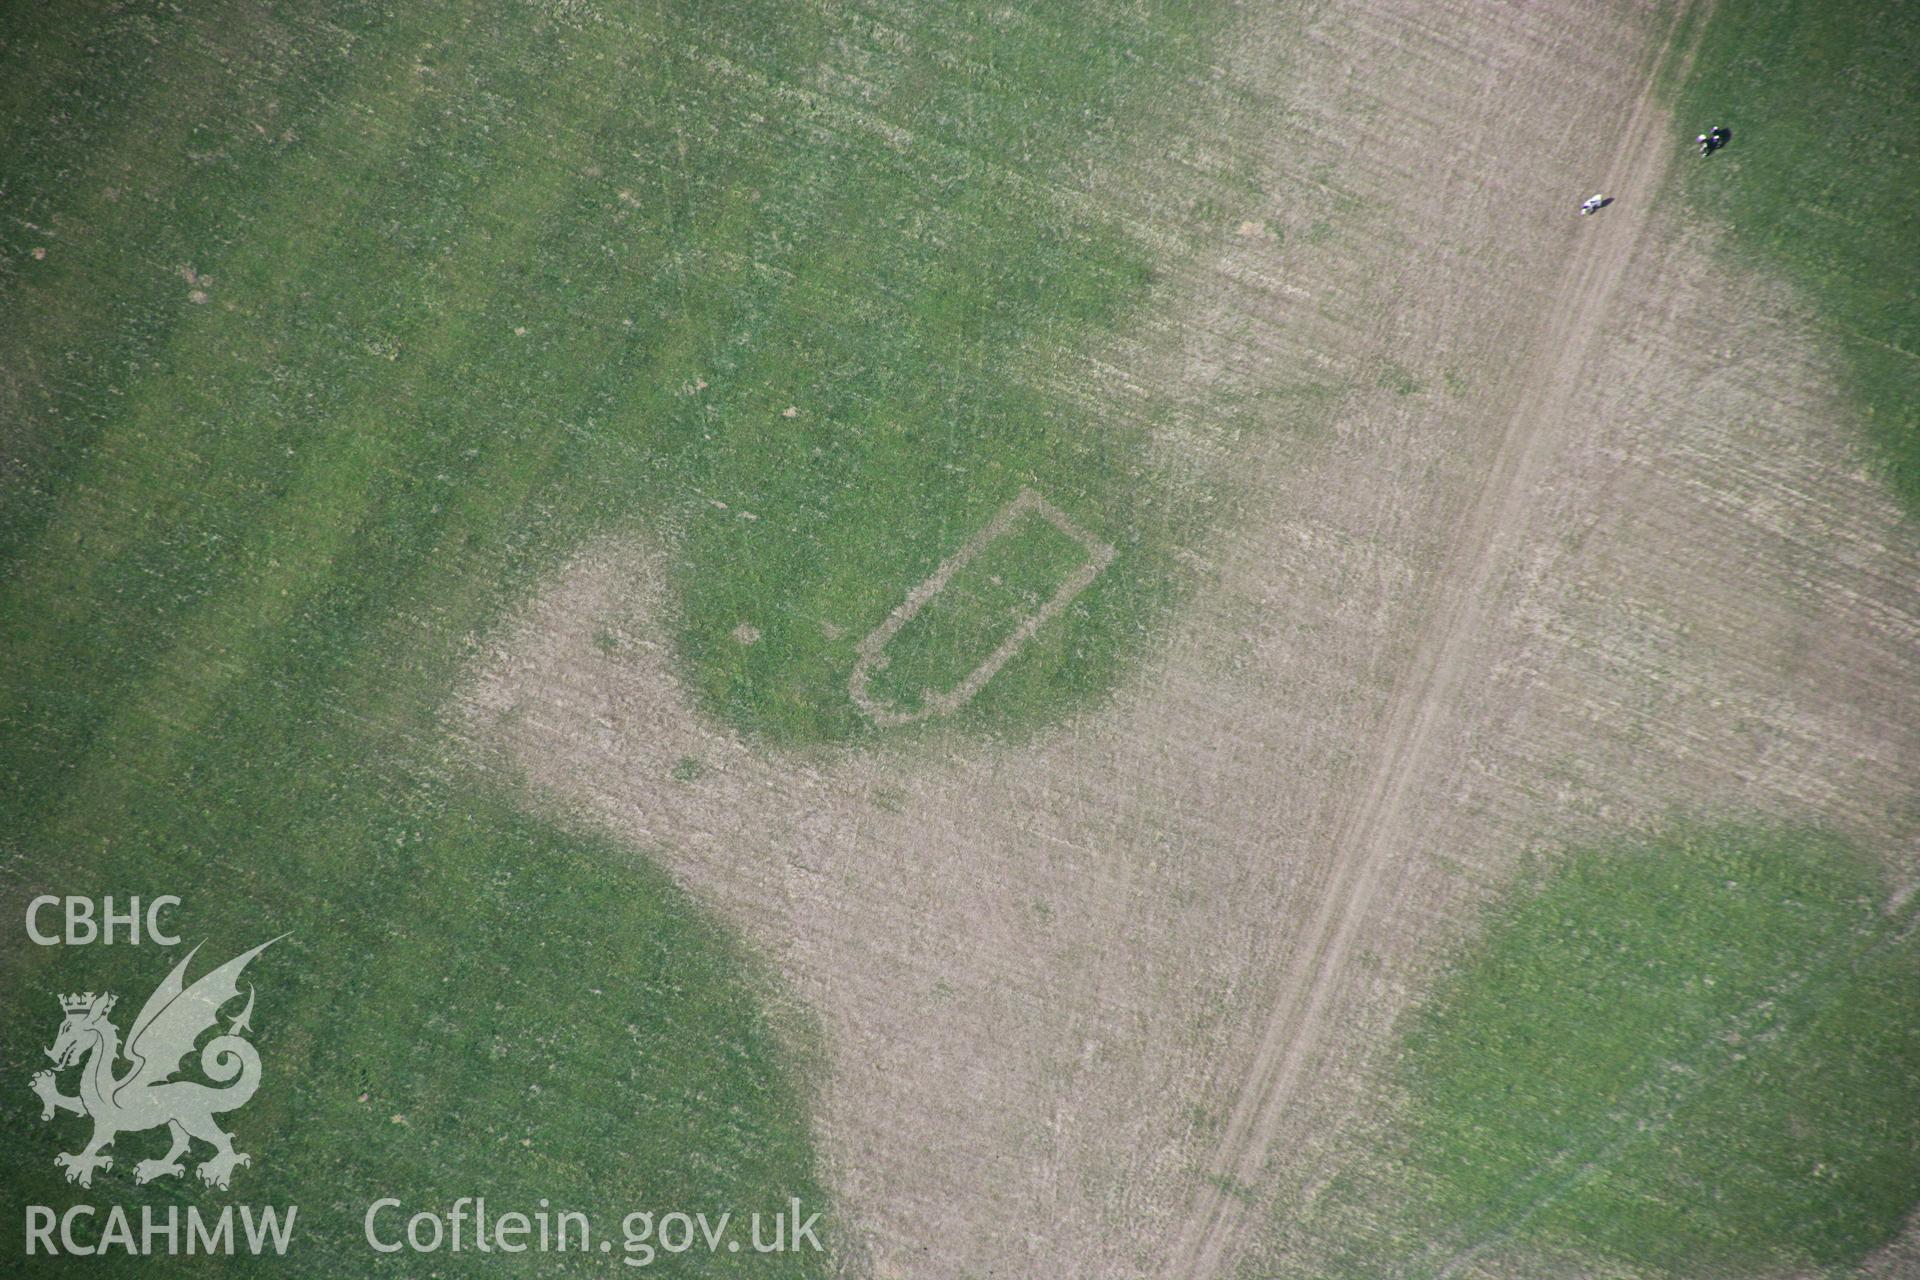 RCAHMW colour oblique aerial photograph of Llwydfaen Medieval Township, site of buried medieval church, view of parched foundations and wider township, from south, taken on 14/08/2006 by Toby Driver.